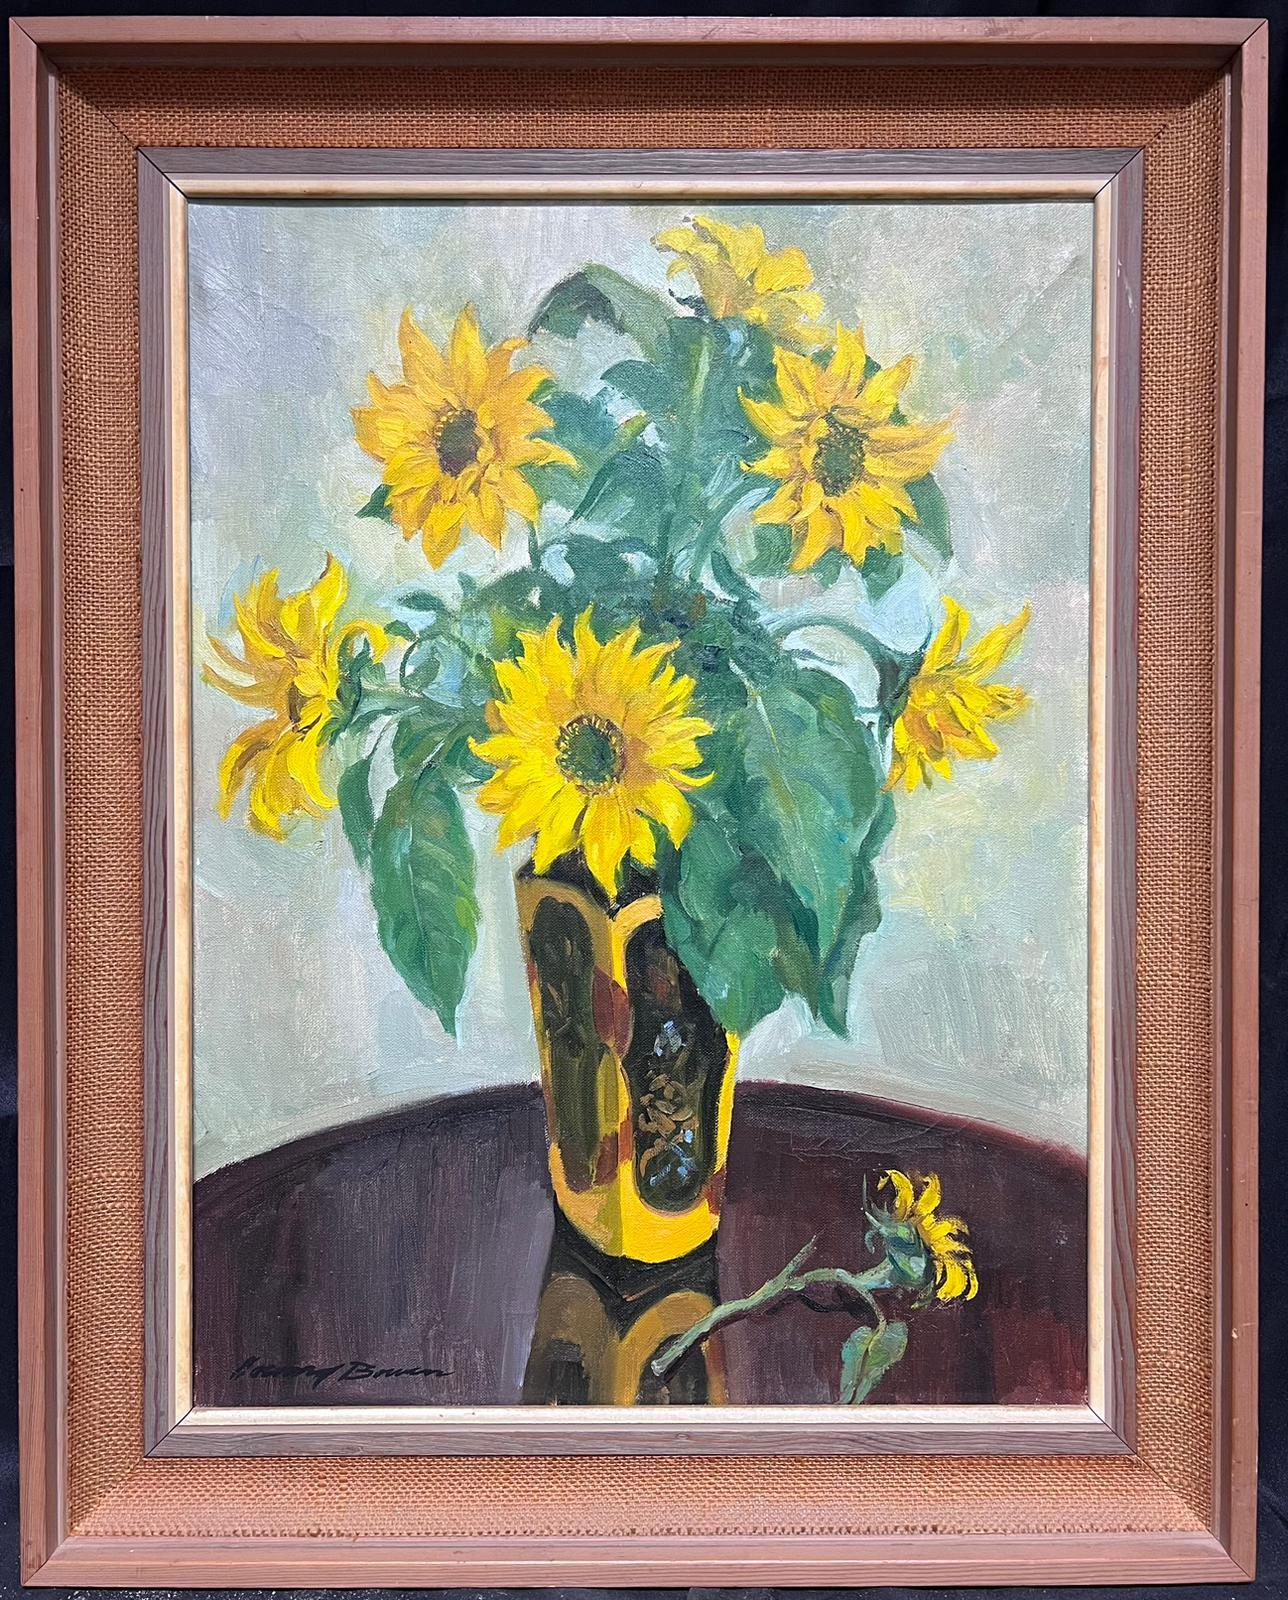 Mid 20th Century English Impressionist Interior Painting - Sunflowers in Vase 1950's English Impressionist Signed Oil Painting on Canvas